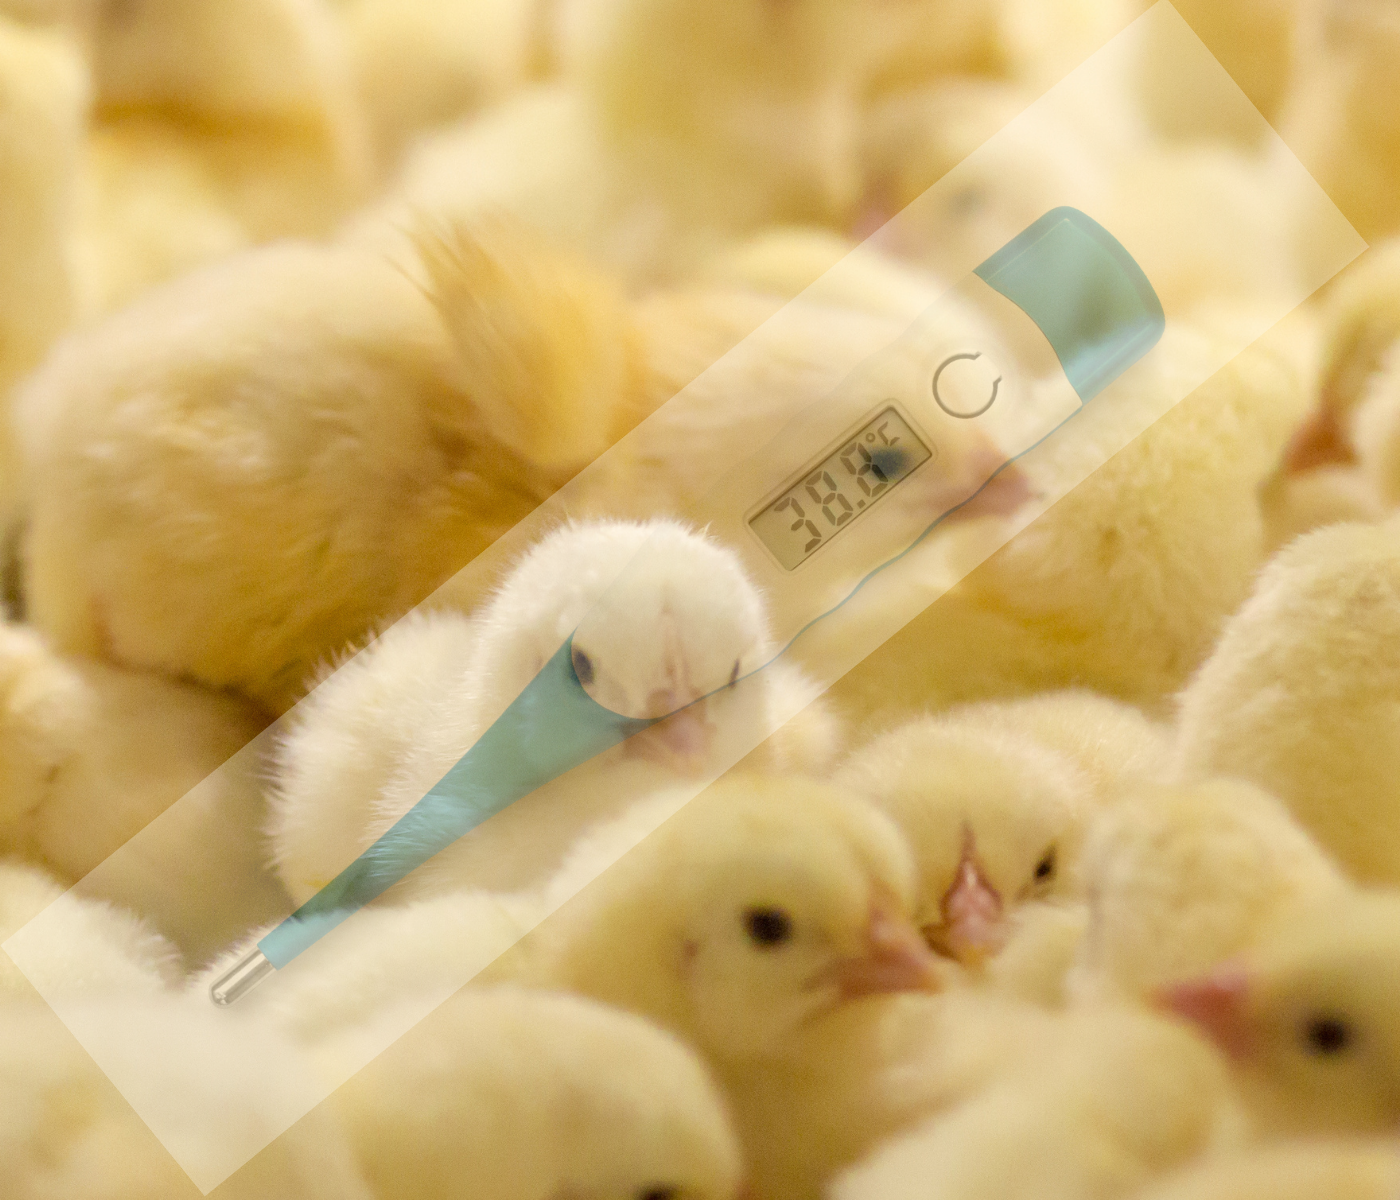 Chick body temperature: from hatchery to farm